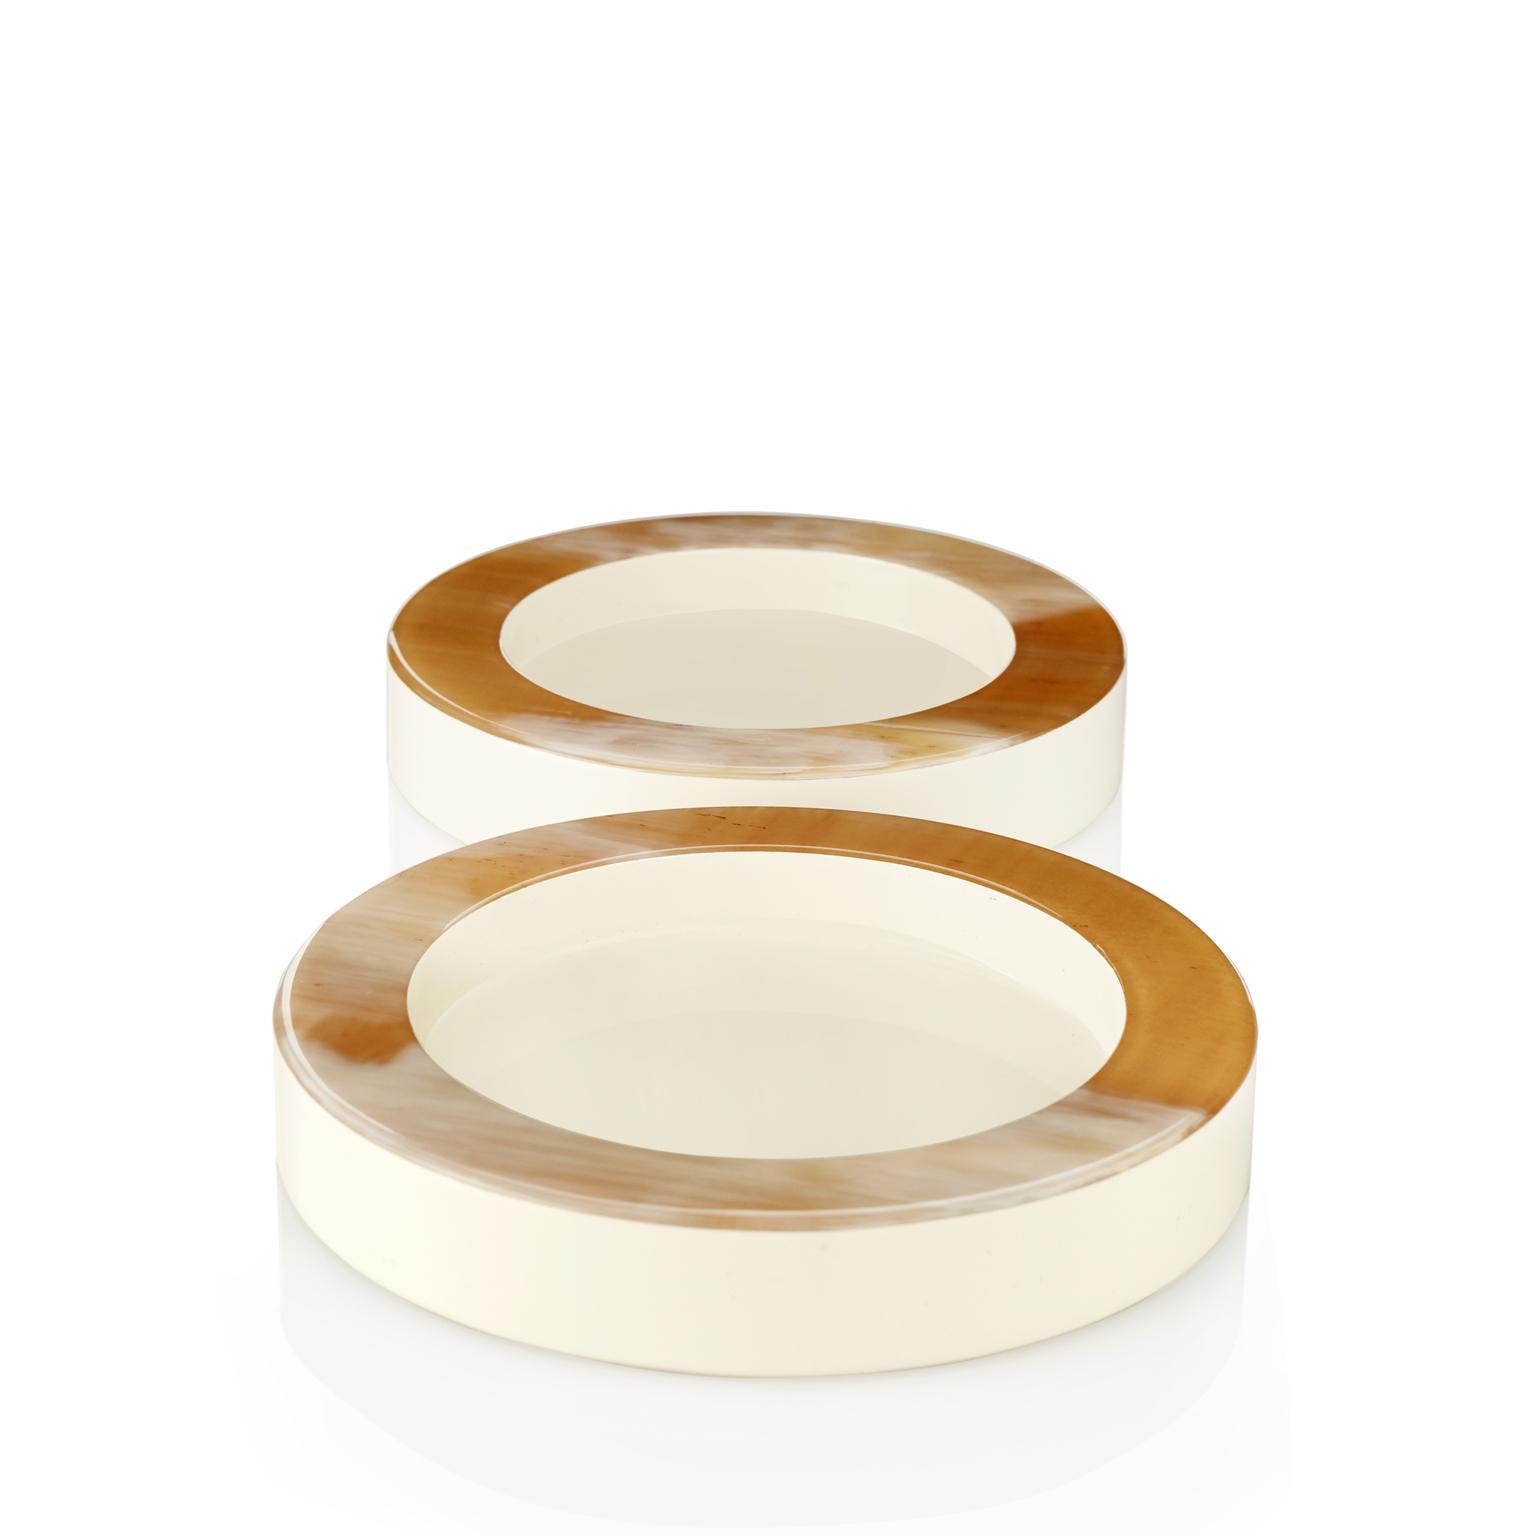 Handcrafted from natural Corno Italiano and lacquered wood with cream-colored gloss finish, this stunning wine coaster will add organic beauty to any table setting, courtesy of its unique veining. The design accommodates a standard bottle of wine